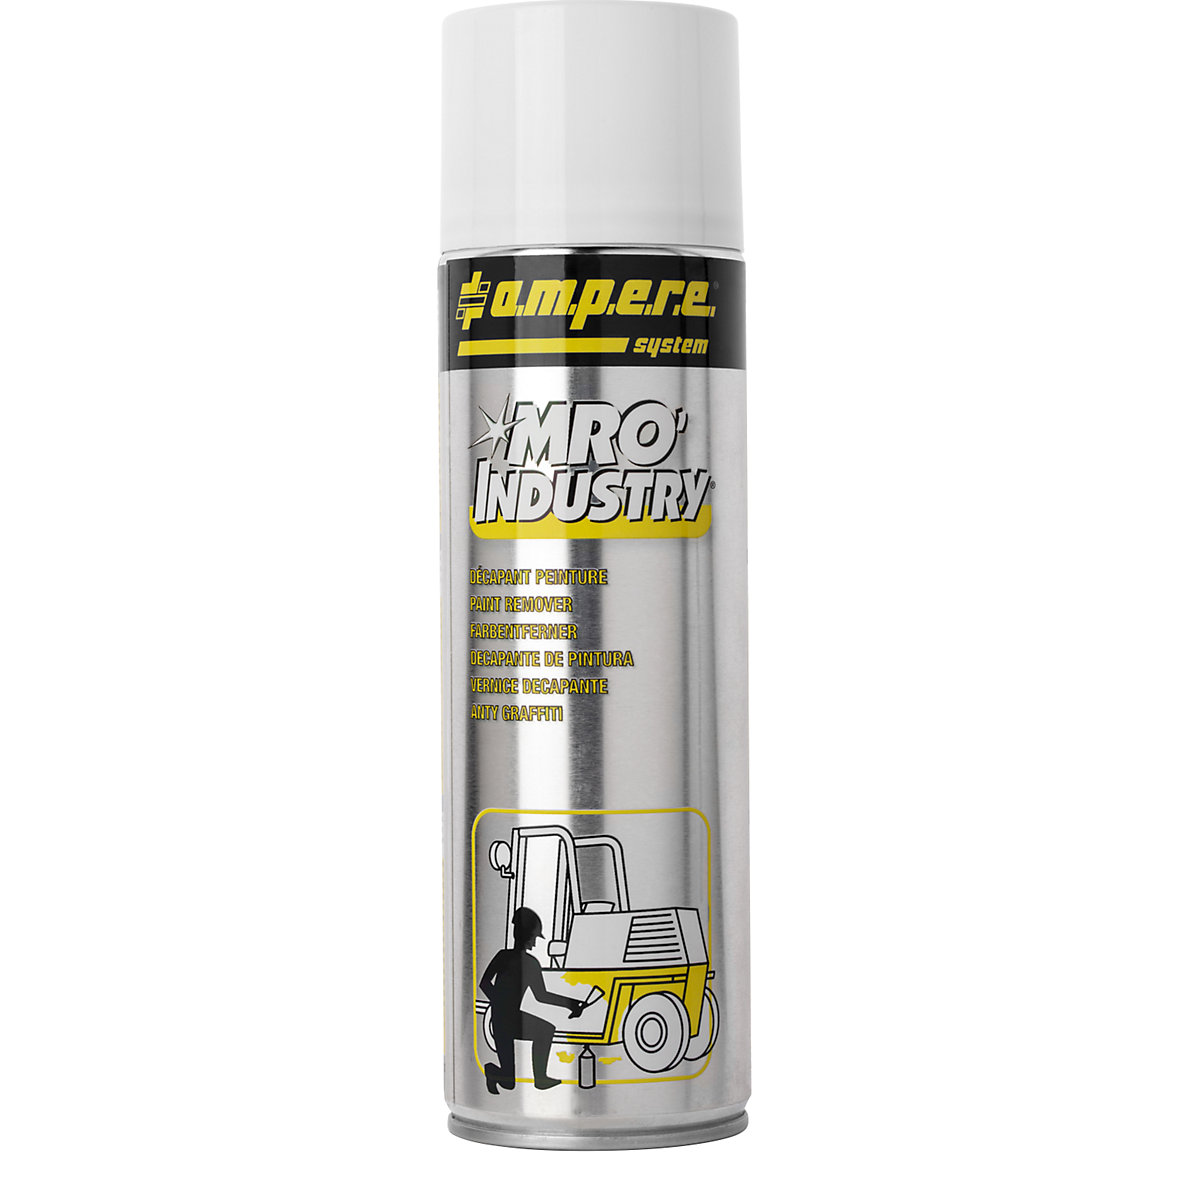 MRO Industry® paint remover - Ampere